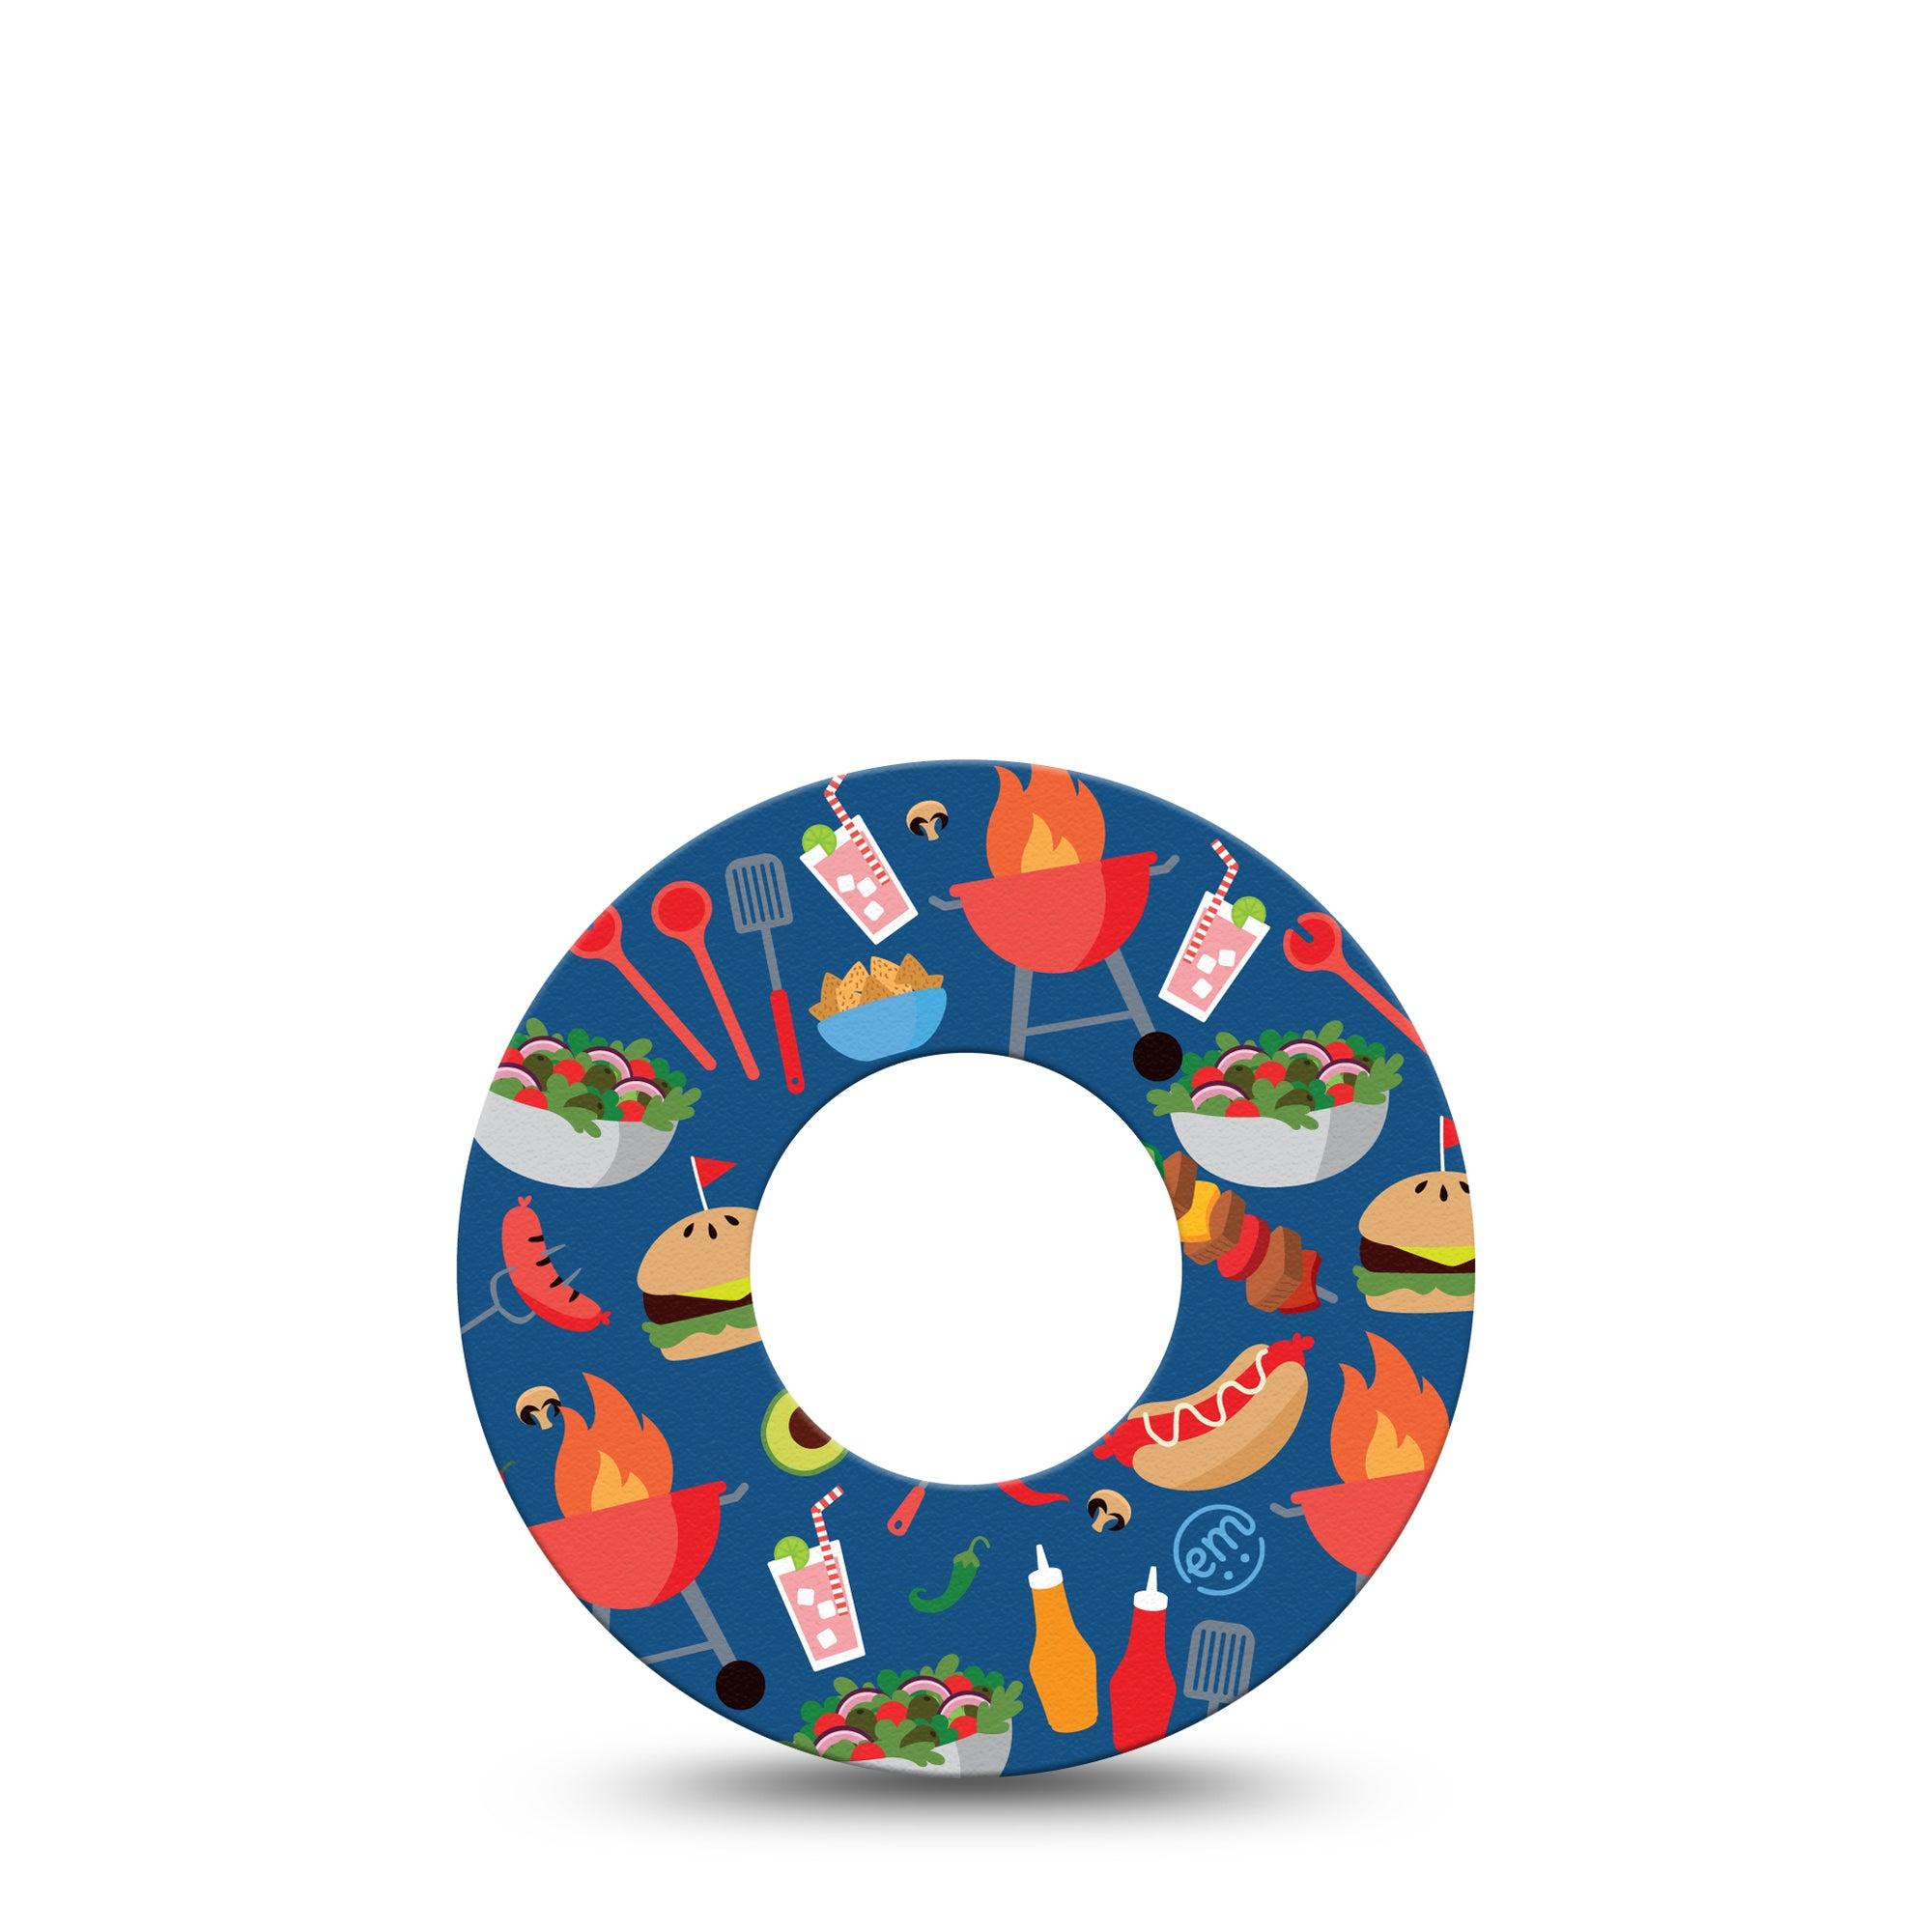 BBQ Time Libre 2 Tape, Single, Barbeque Snack Time Themed, CGM Adhesive Patch Design